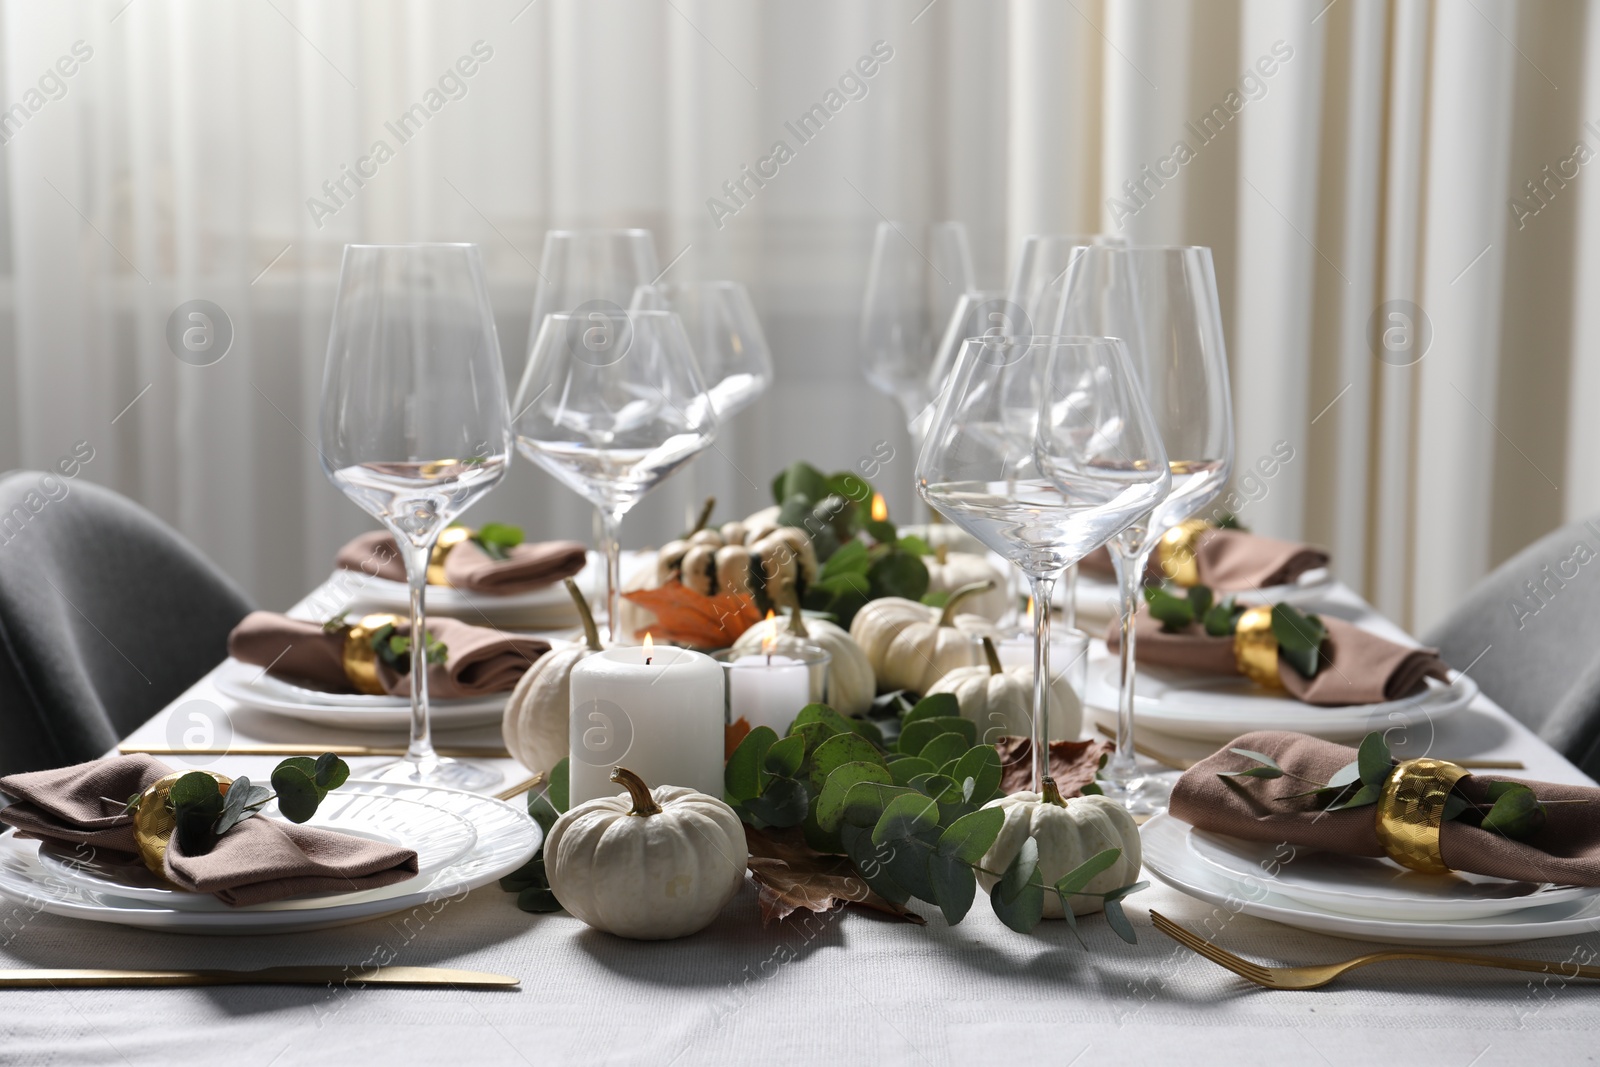 Photo of Beautiful autumn table setting. Plates, cutlery, glasses and floral decor indoors